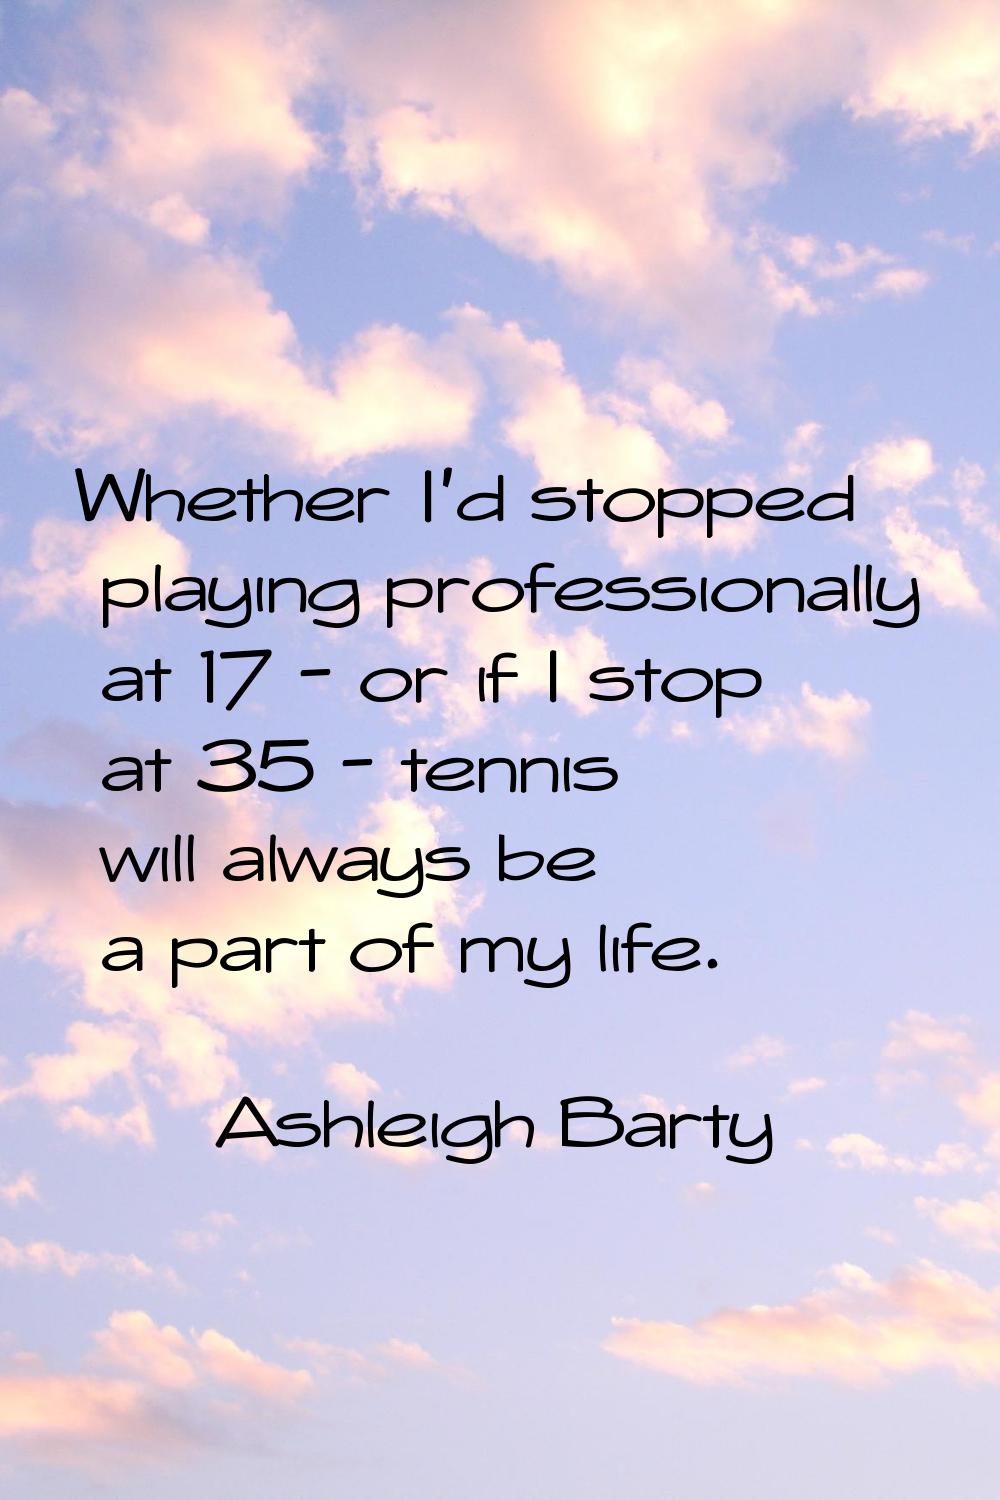 Whether I'd stopped playing professionally at 17 - or if I stop at 35 - tennis will always be a par